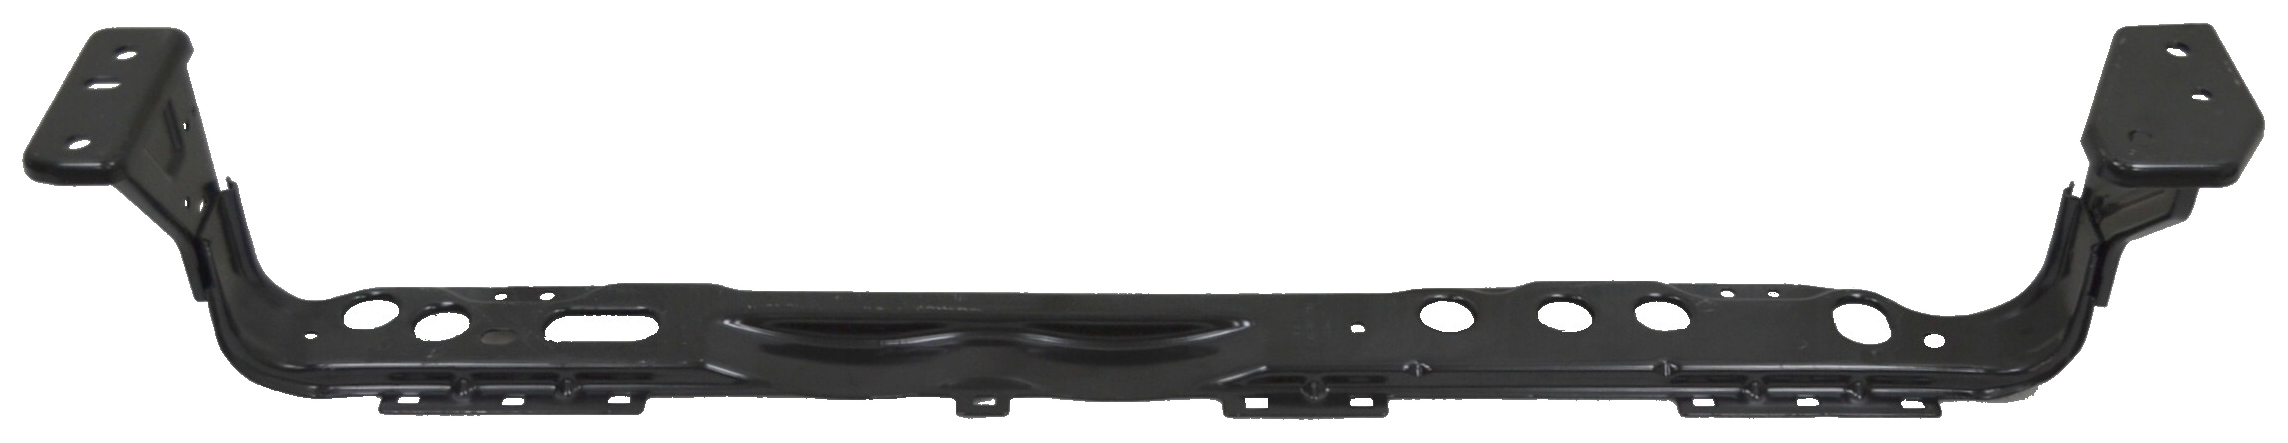 Aftermarket RADIATOR SUPPORTS for FORD - FOCUS, FOCUS,12-18,Radiator support